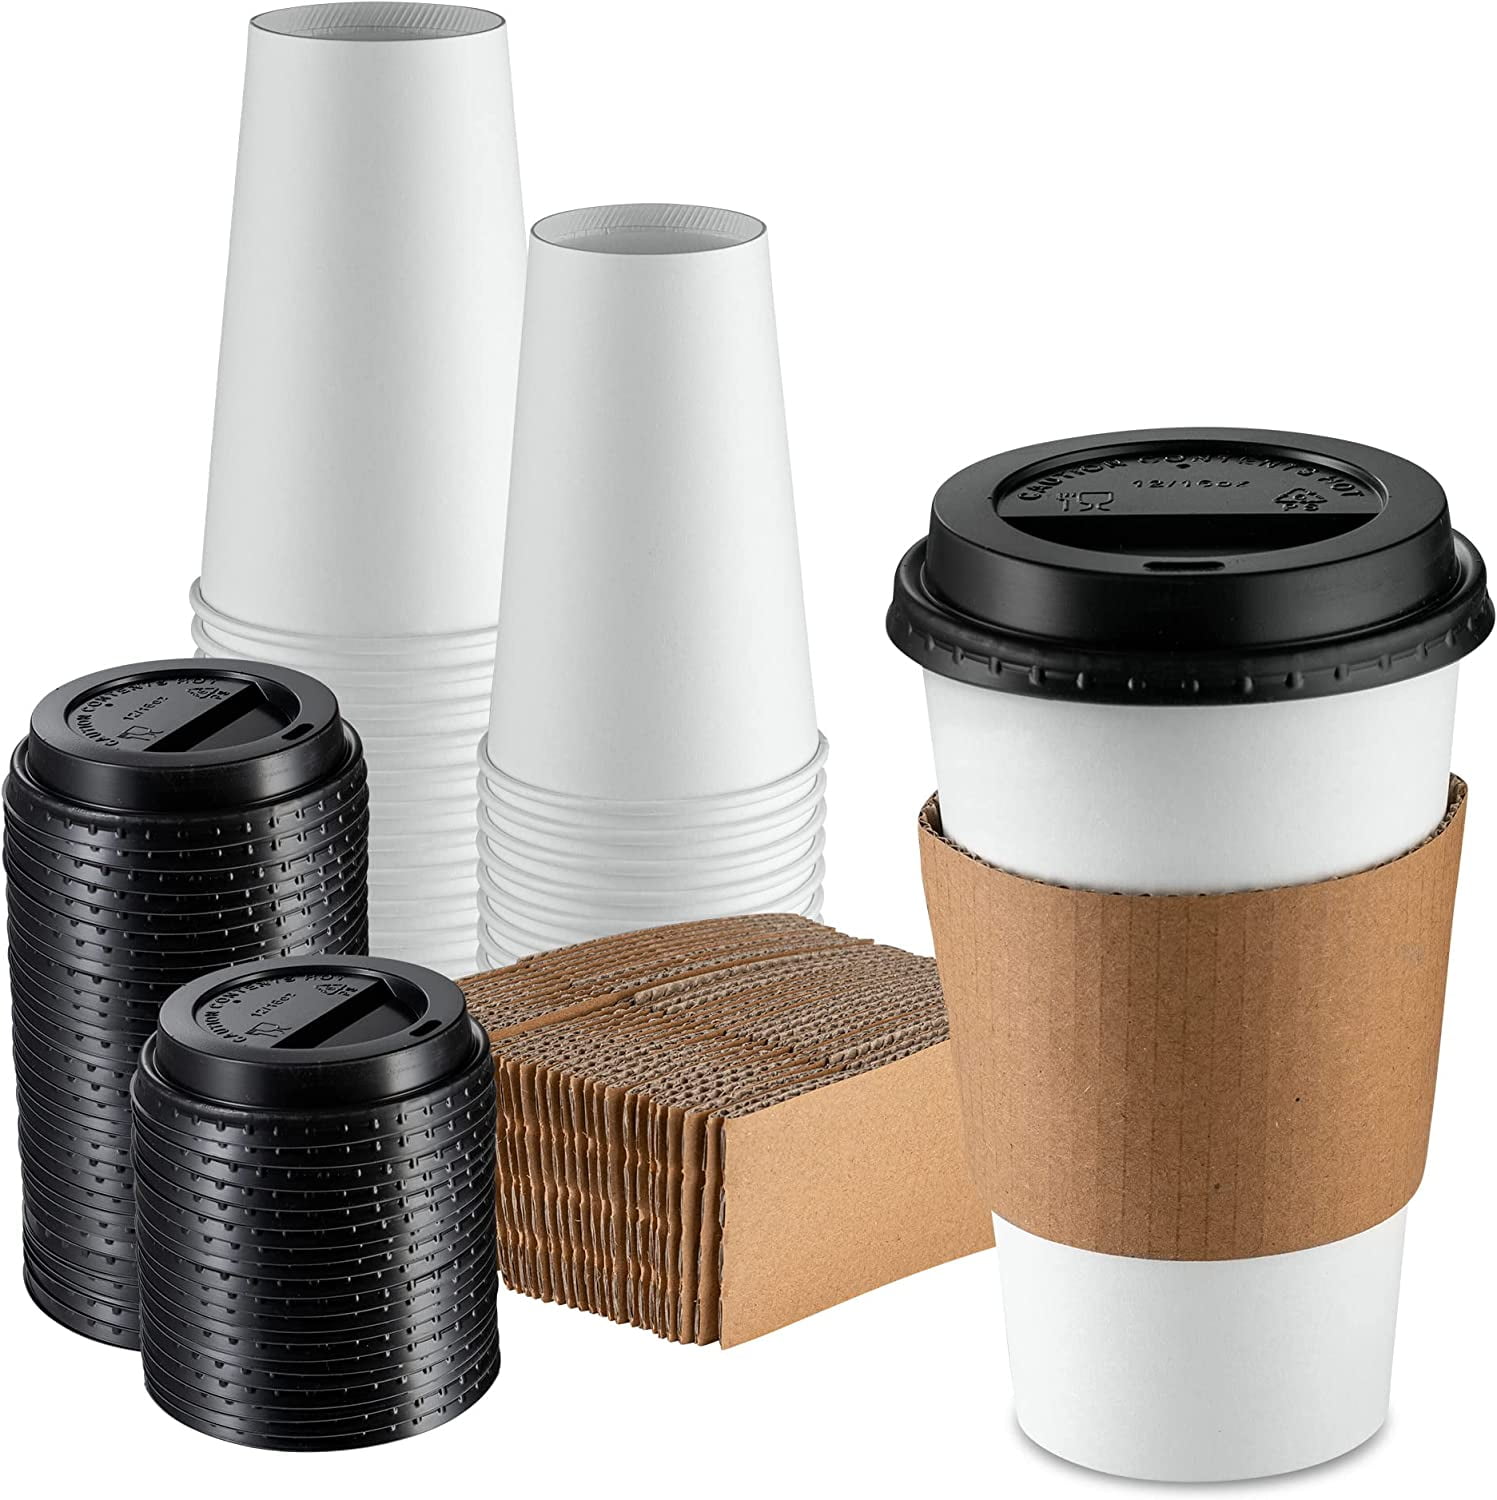 Bev Tek Clear Plastic Ripple Hot / Cold Cup Sleeve - Fits 12, 16 and 24 oz  - 1000 count box